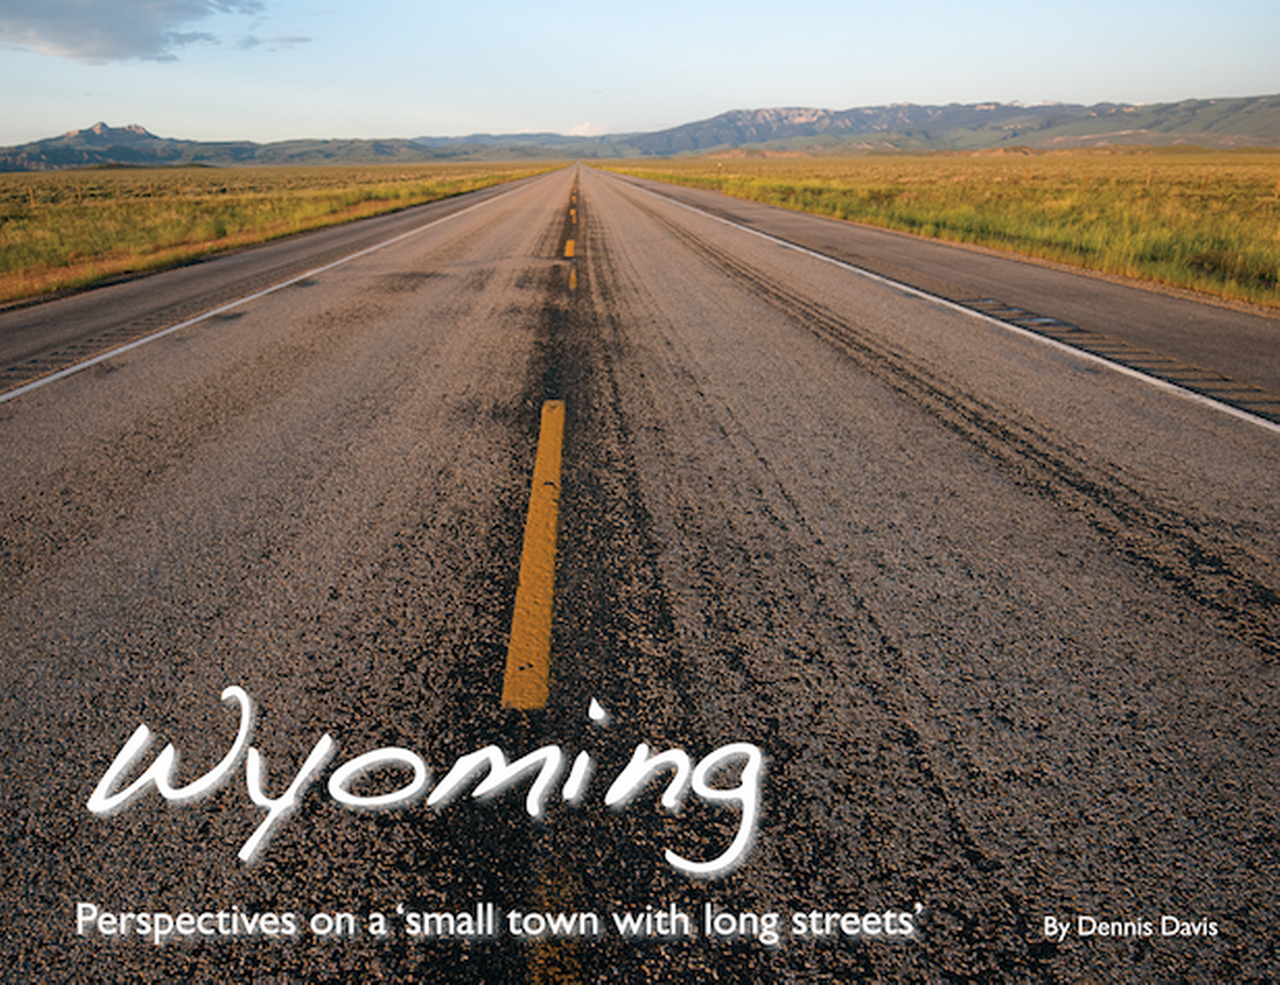 Opening reception for Wyoming - Perspectives on a 'small town with long streets' image